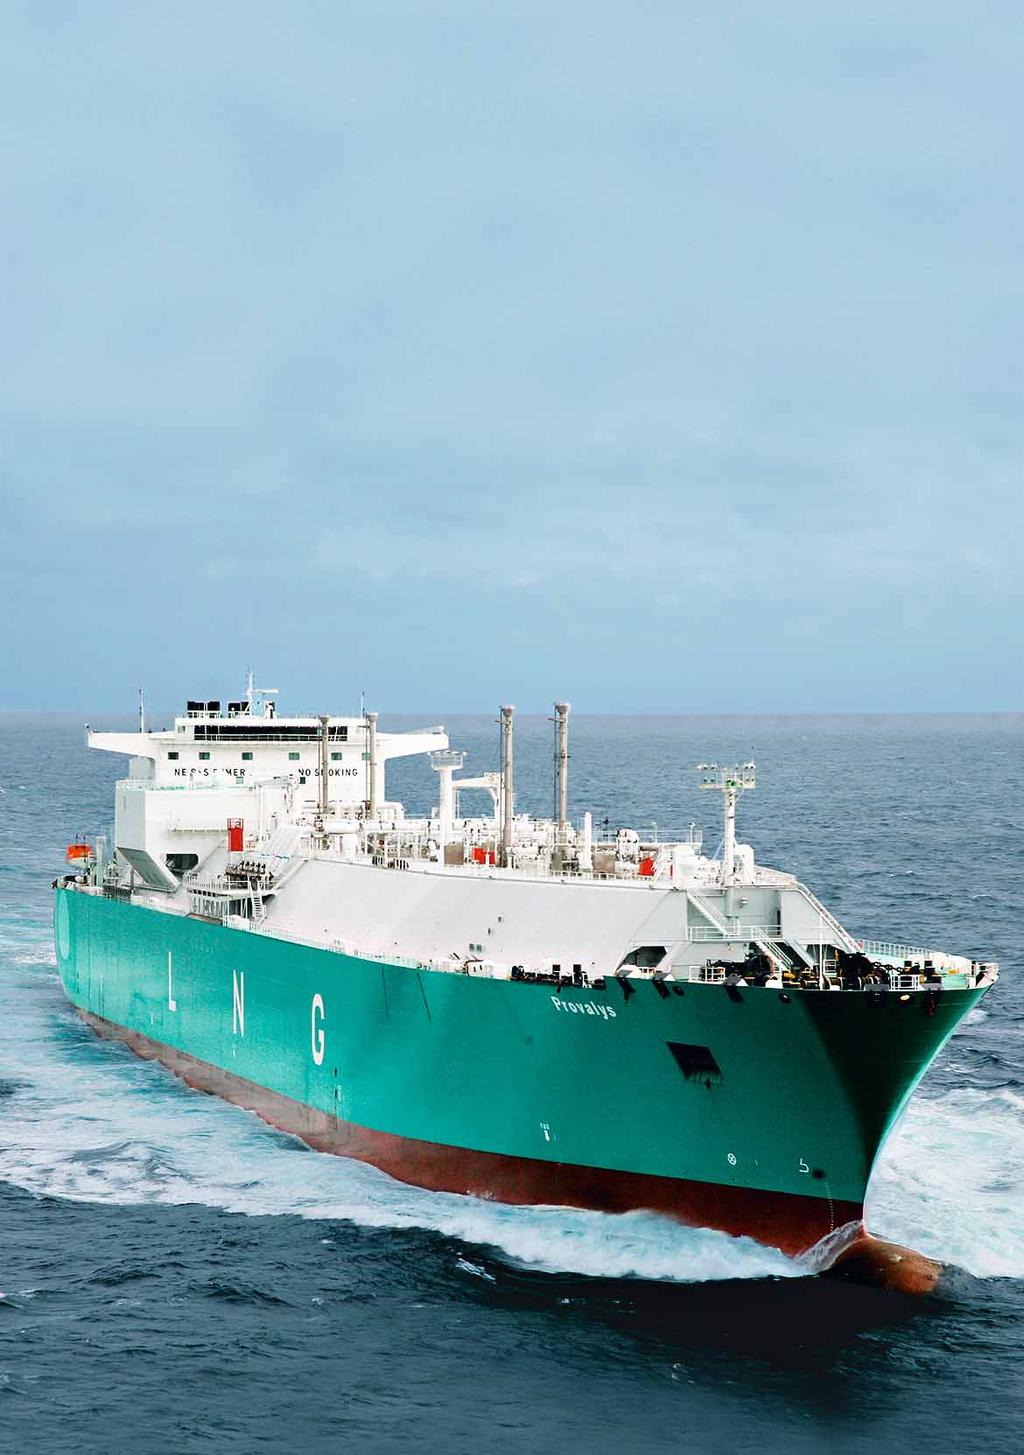 Tanking along Increasing fuel efficiency and cargo capacity of LNG carriers using electric propulsion Jan Fredrik Hansen, Alf Kåre Ådnanes As the world s demand for energy has increased, so too has